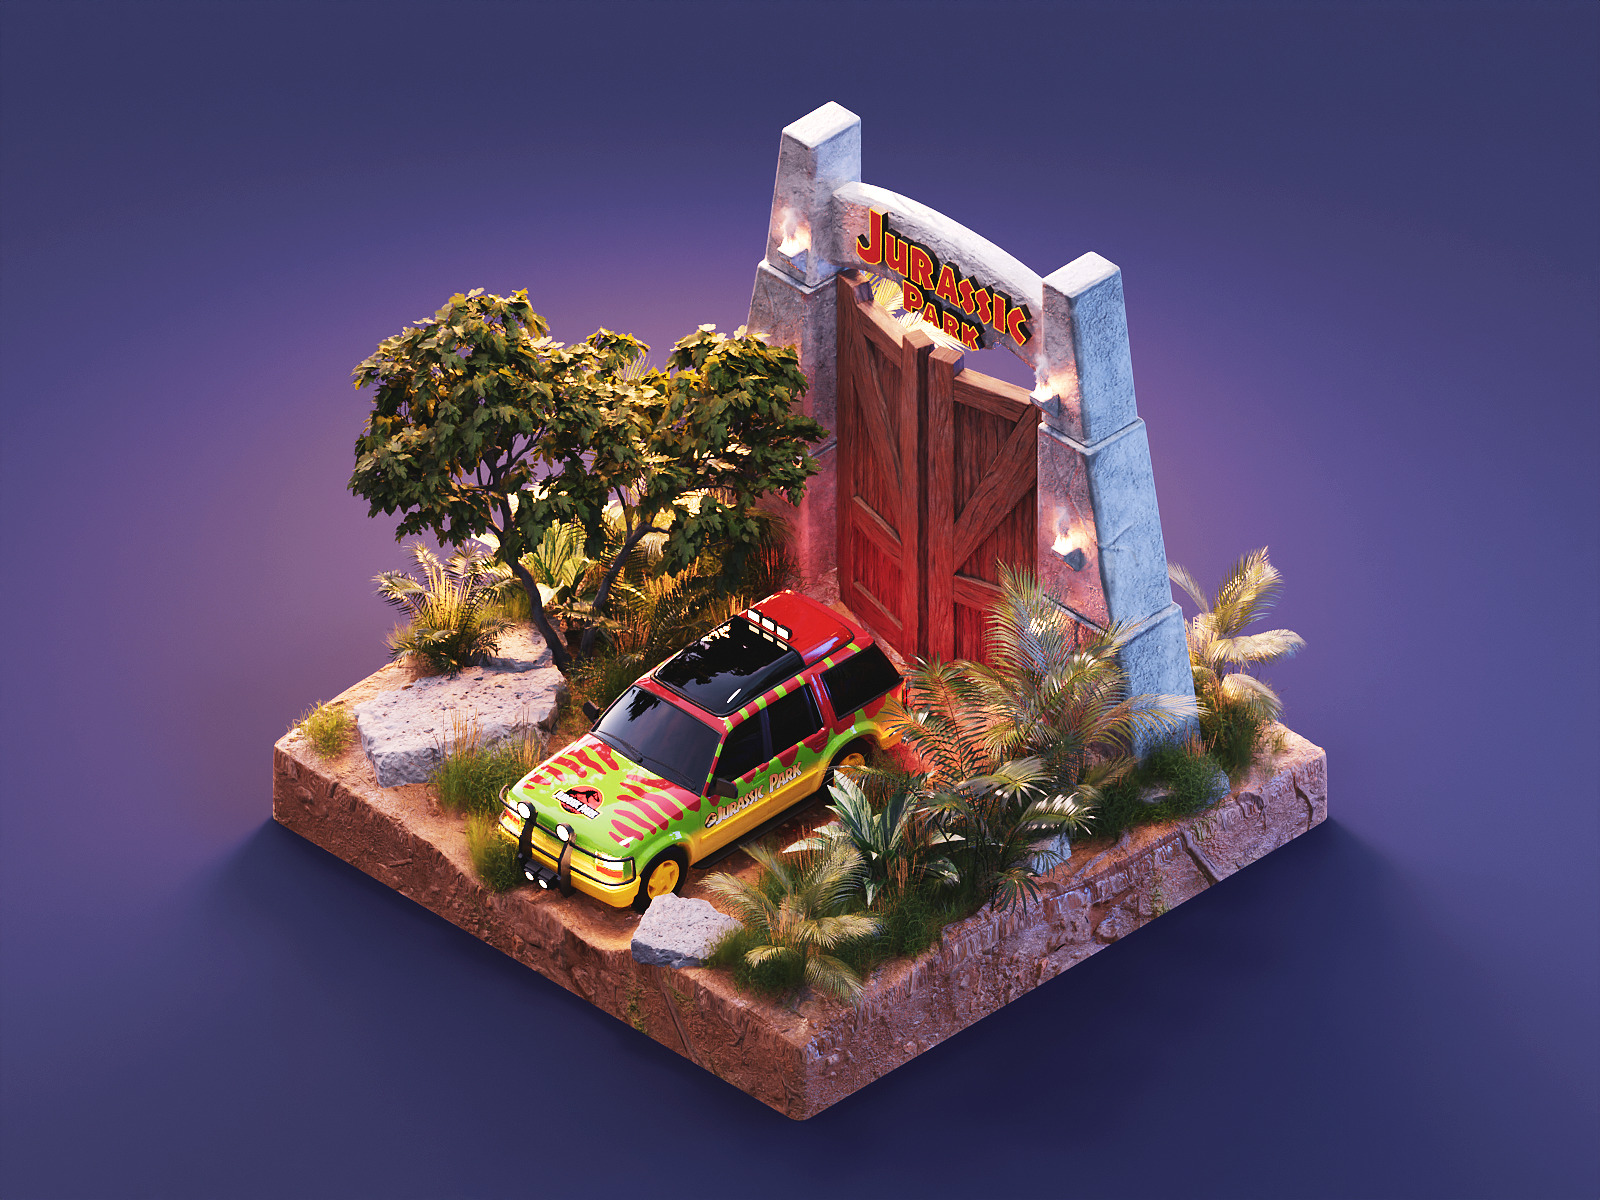 3D Art: Blender Tutorials by Roman Klco Inspired by Movies